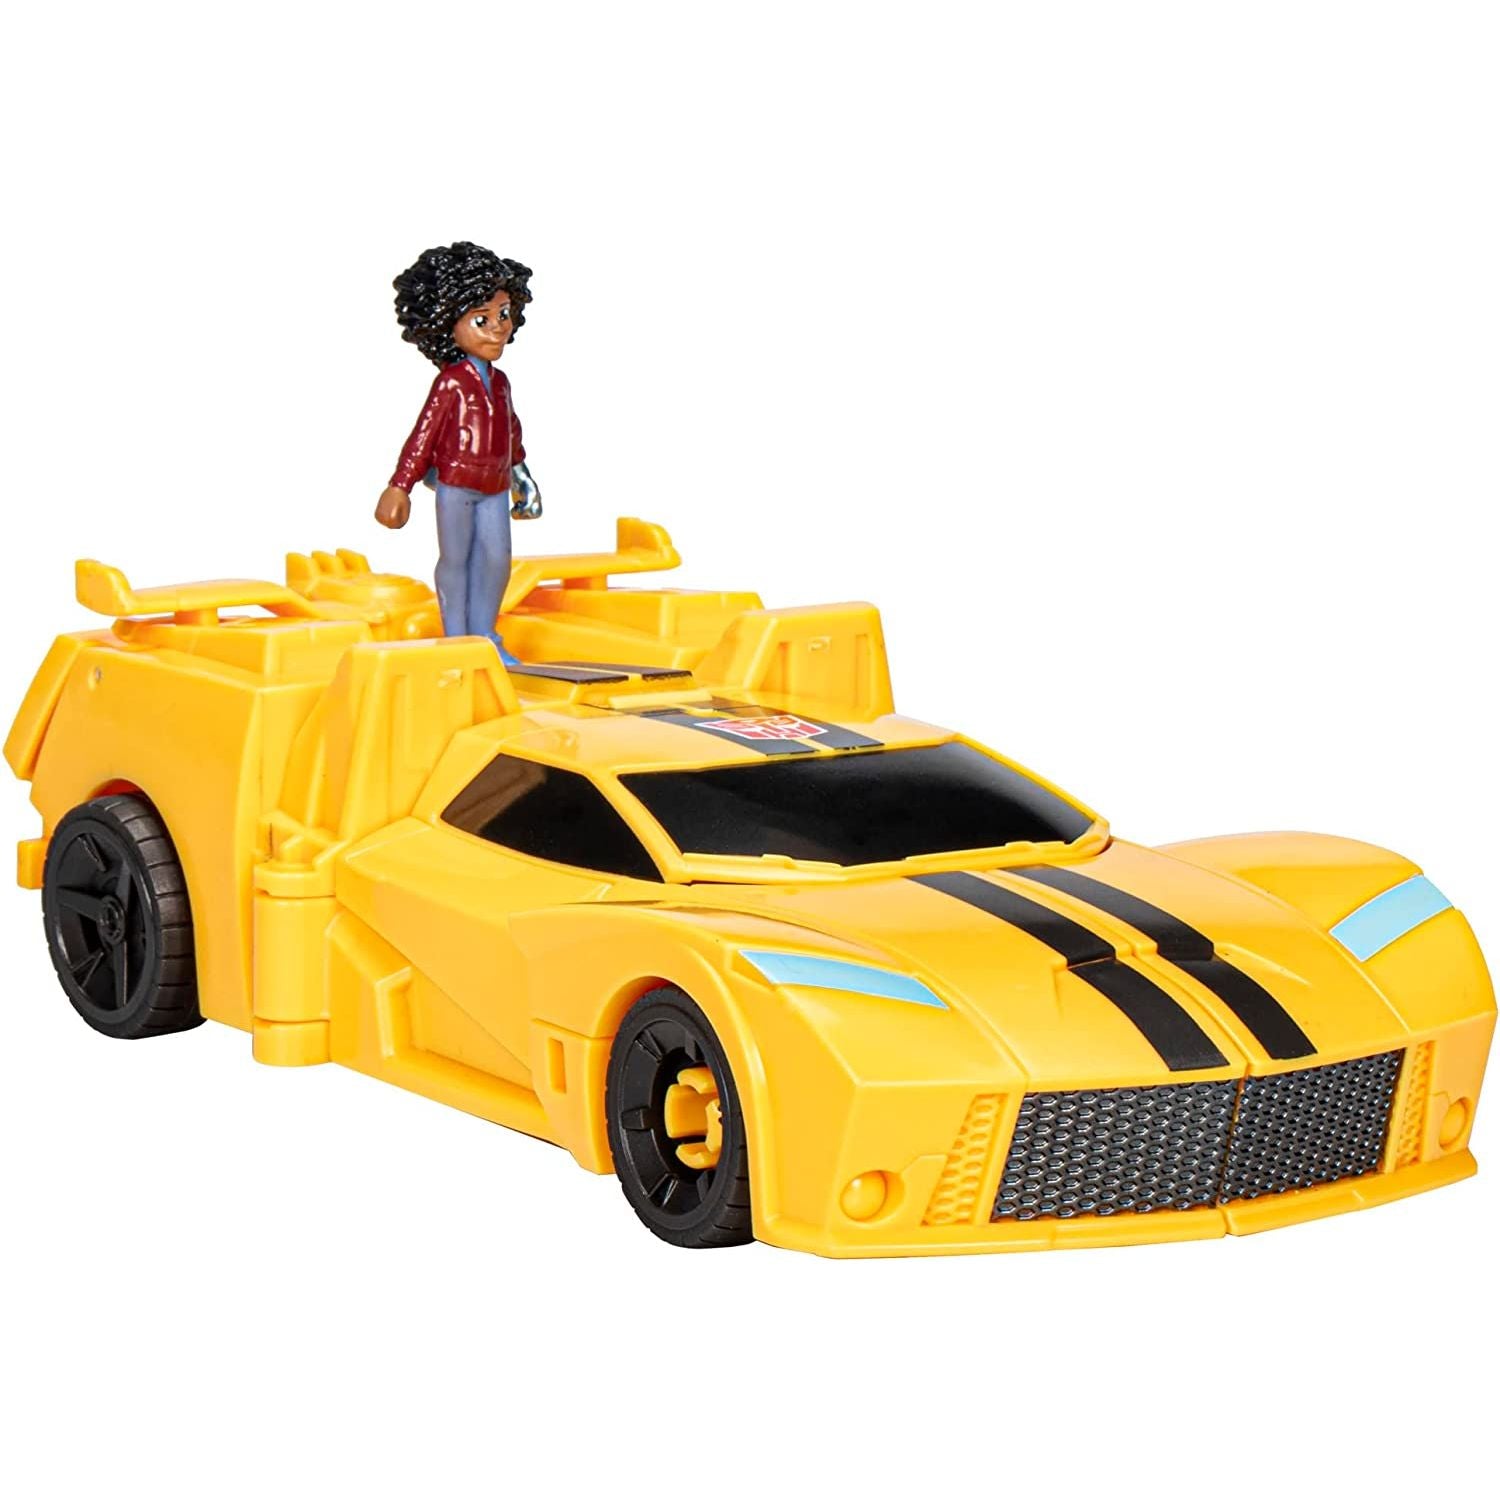 Transformers EarthSpark Spin Changer Bumblebee and Mo Malto Action Figure Toy